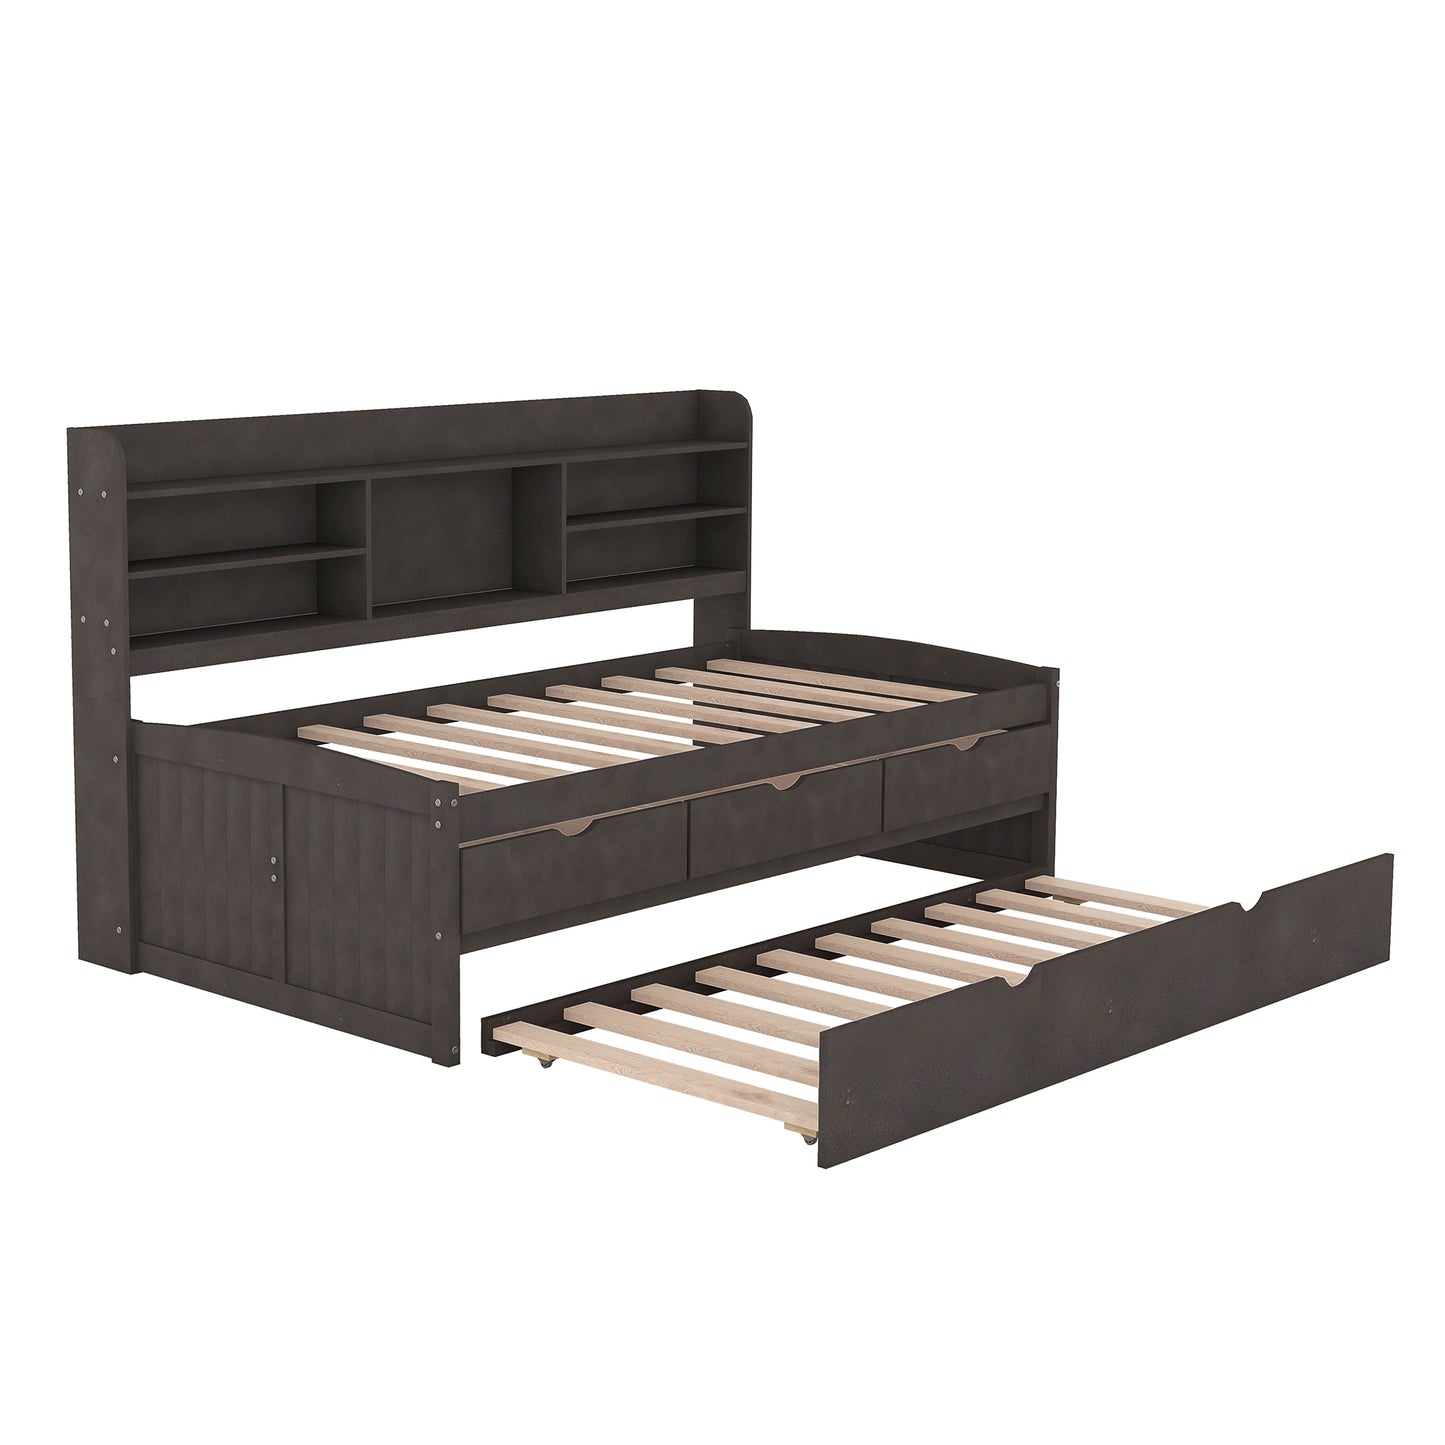 Twin Size Wooden Captain Platform Bed with Built-in Bookshelves, 3 Storage Drawers and Trundle, Antique Gray